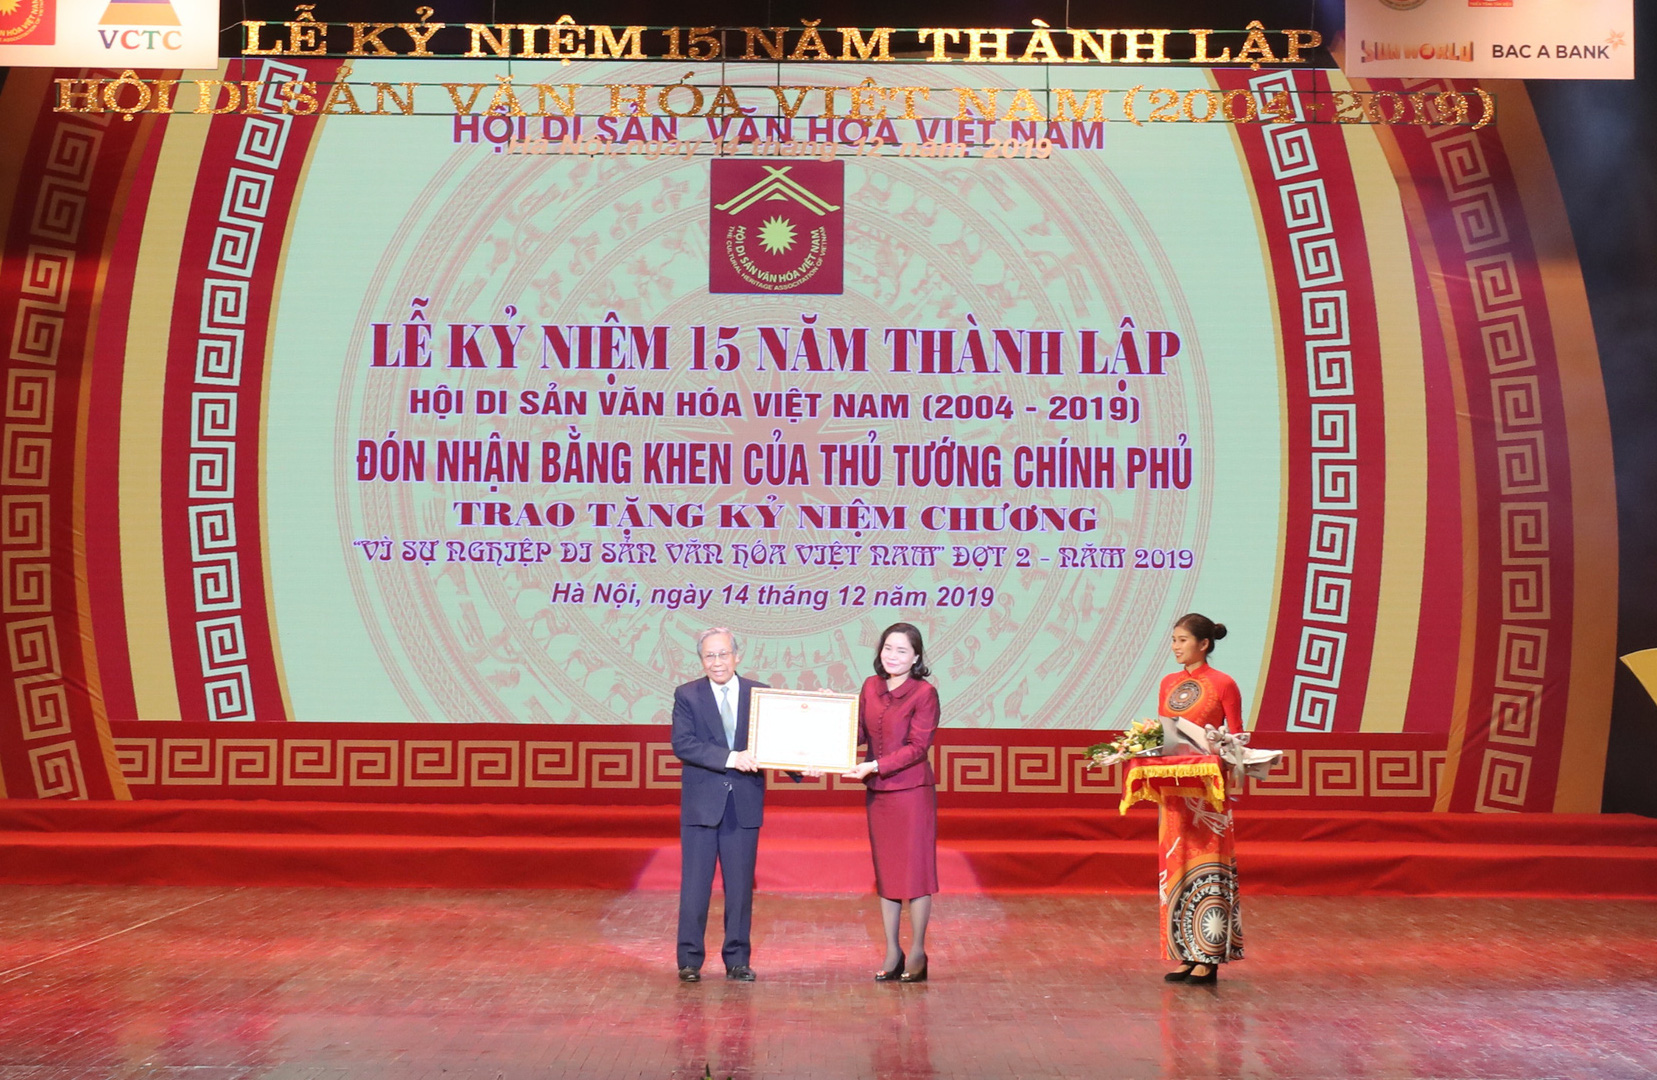 Requirements for awarding and receiving emulation titles and commendation forms in Vietnam